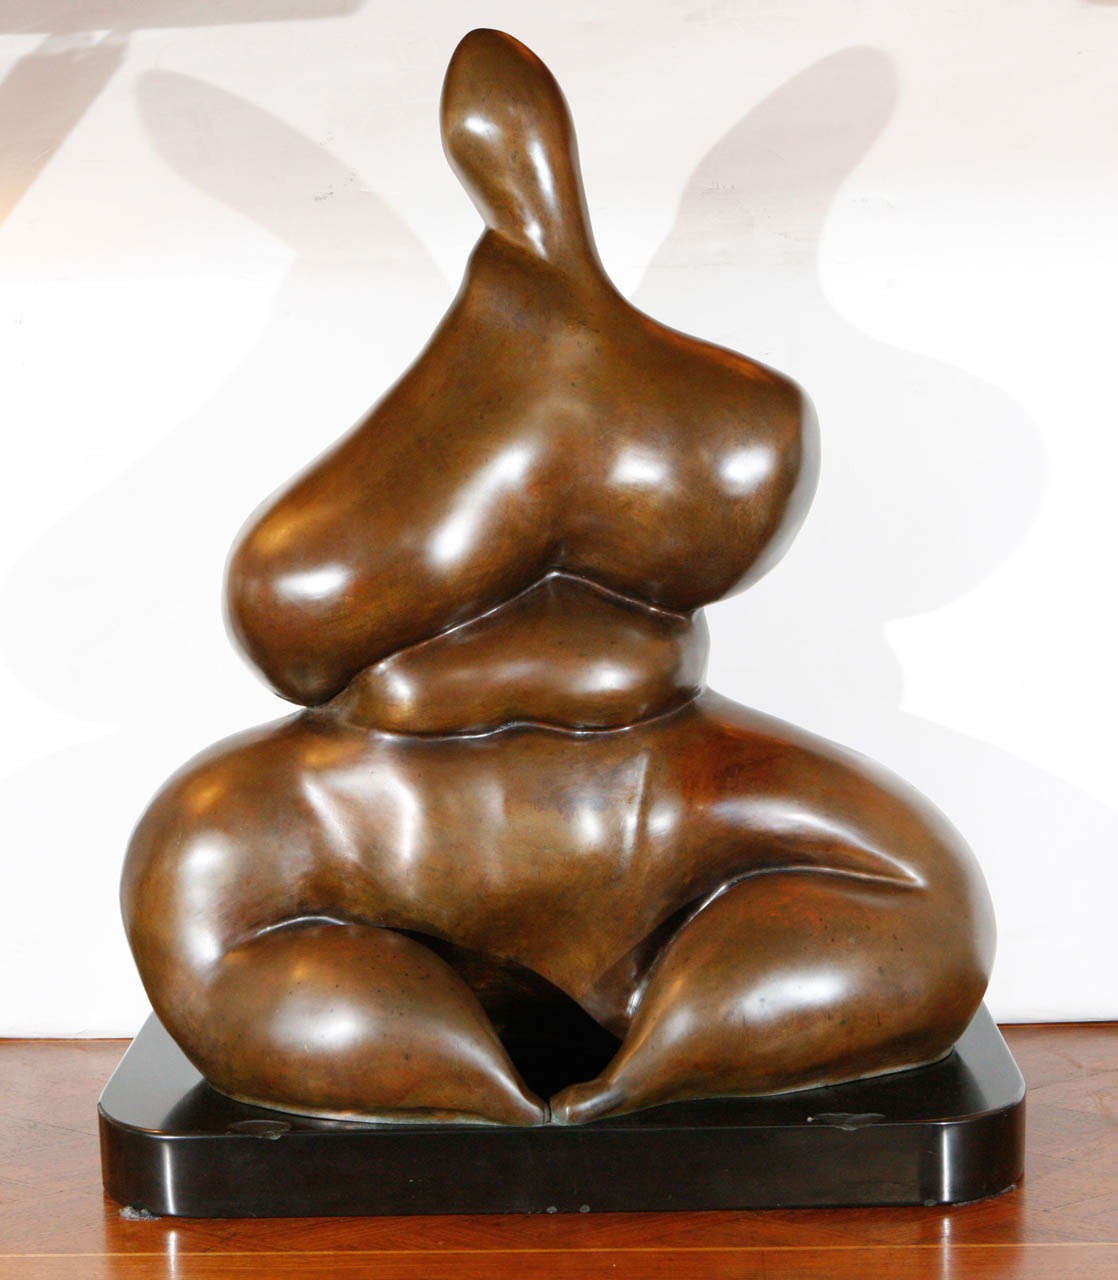 An amazing large bronze sculpture of a sitting woman by noted Southern California sculptor, Sy Rosenwasser. Signed and numbered 1/8. Sculpture is mounted on a black marble base. 

Sy Rosenwasser's work may be viewed in many public and private